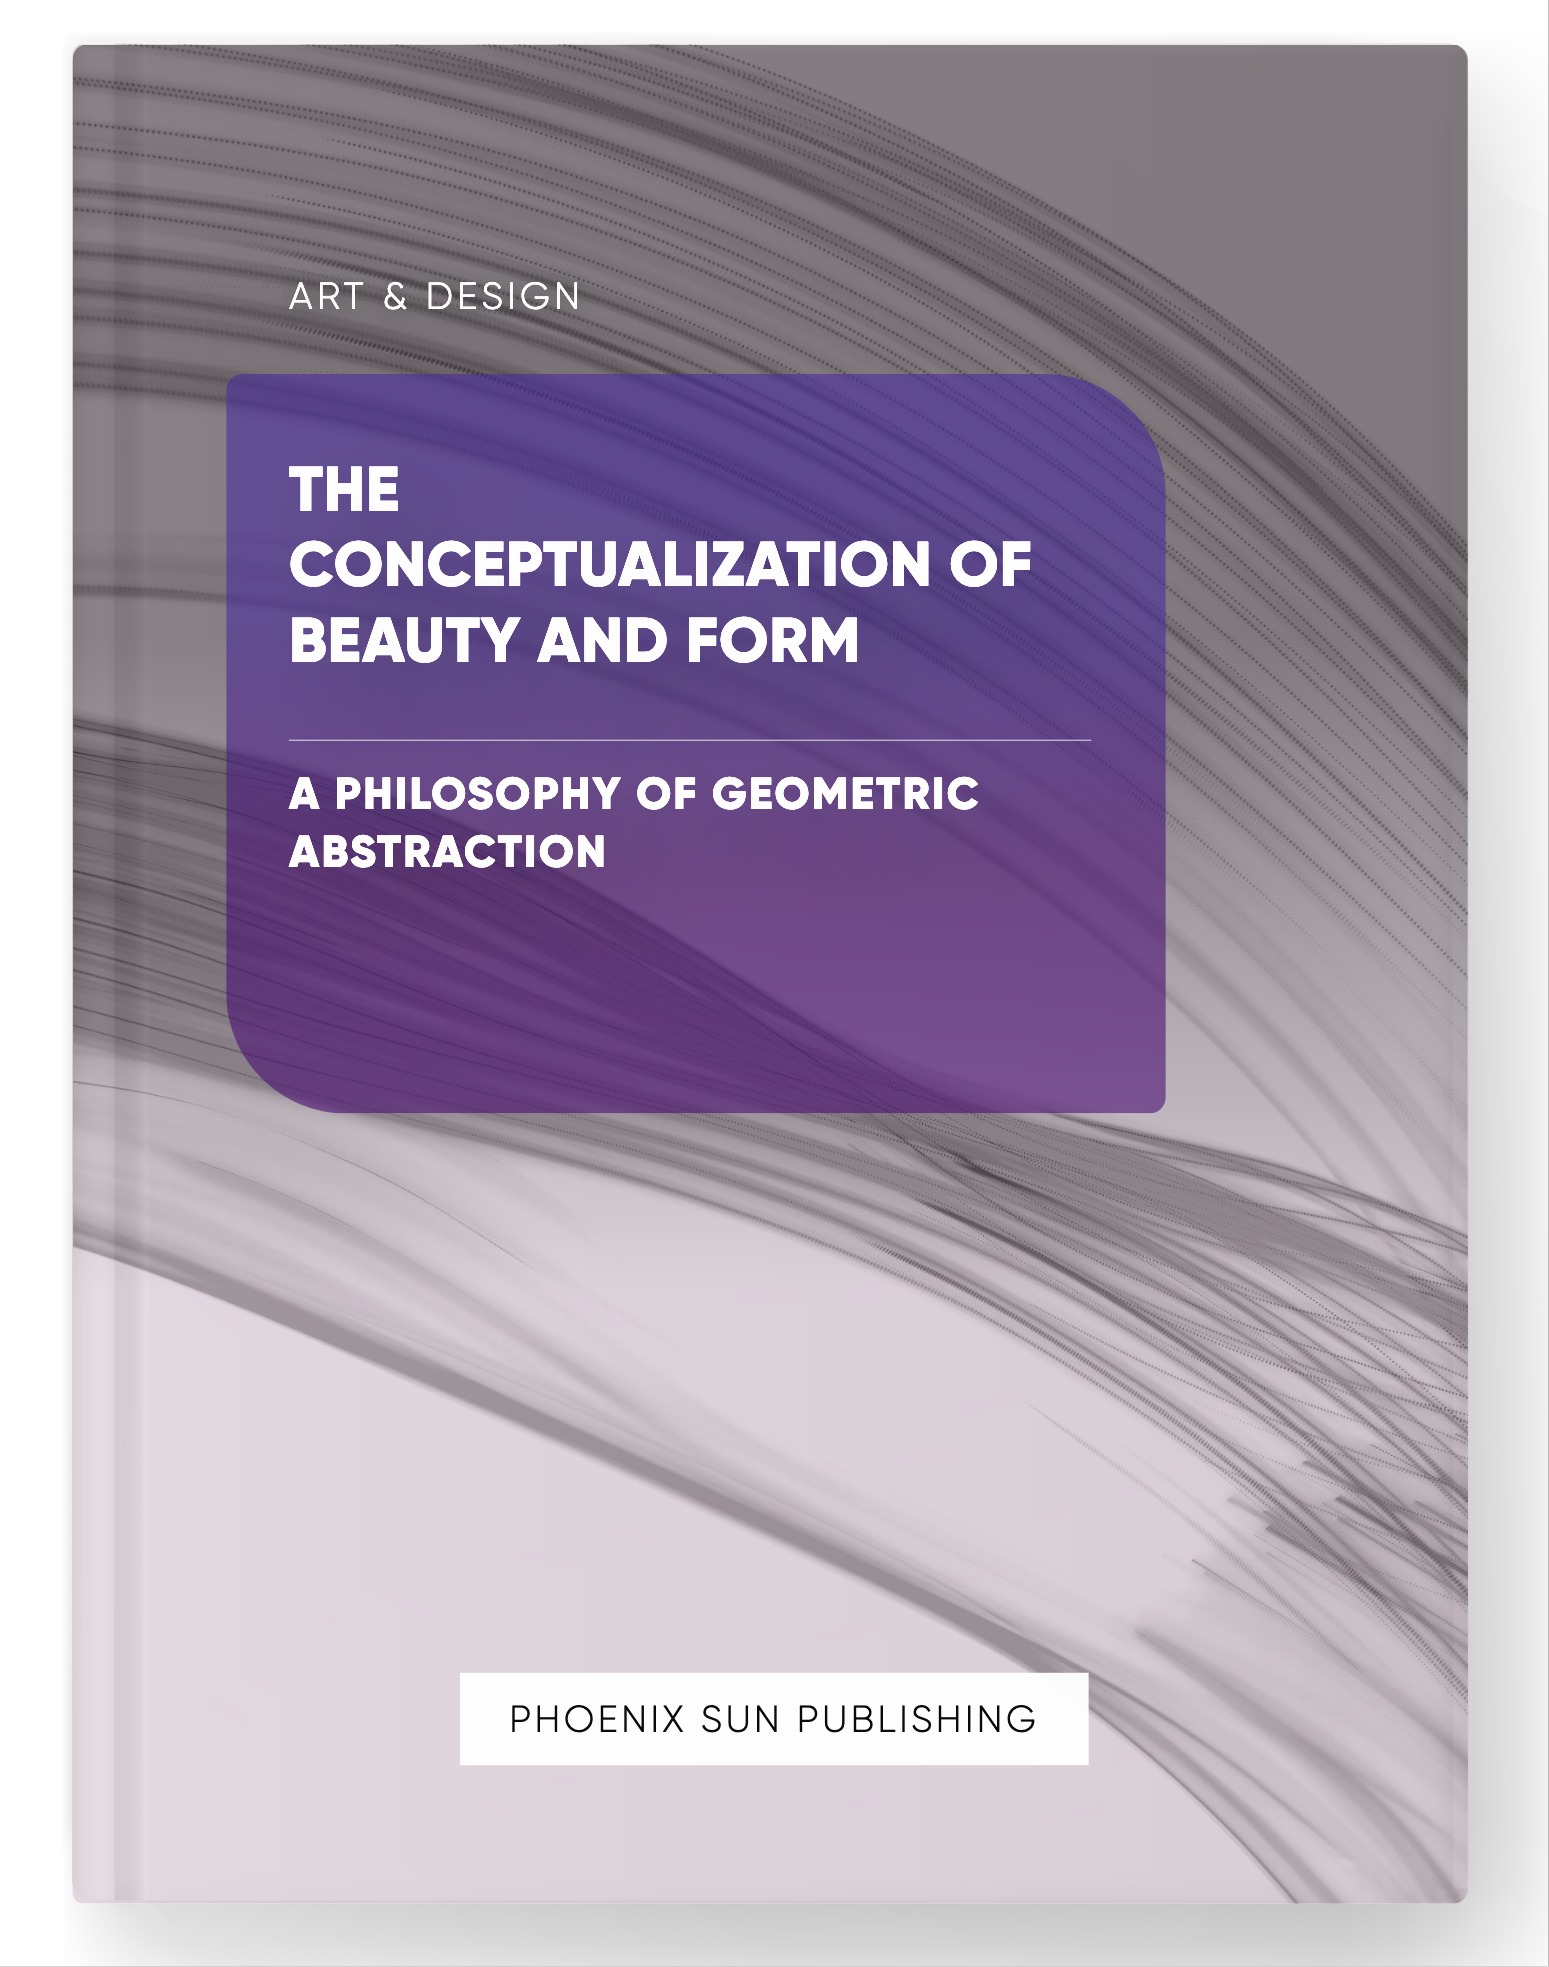 The Conceptualization of Beauty and Form – A Philosophy of Geometric Abstraction